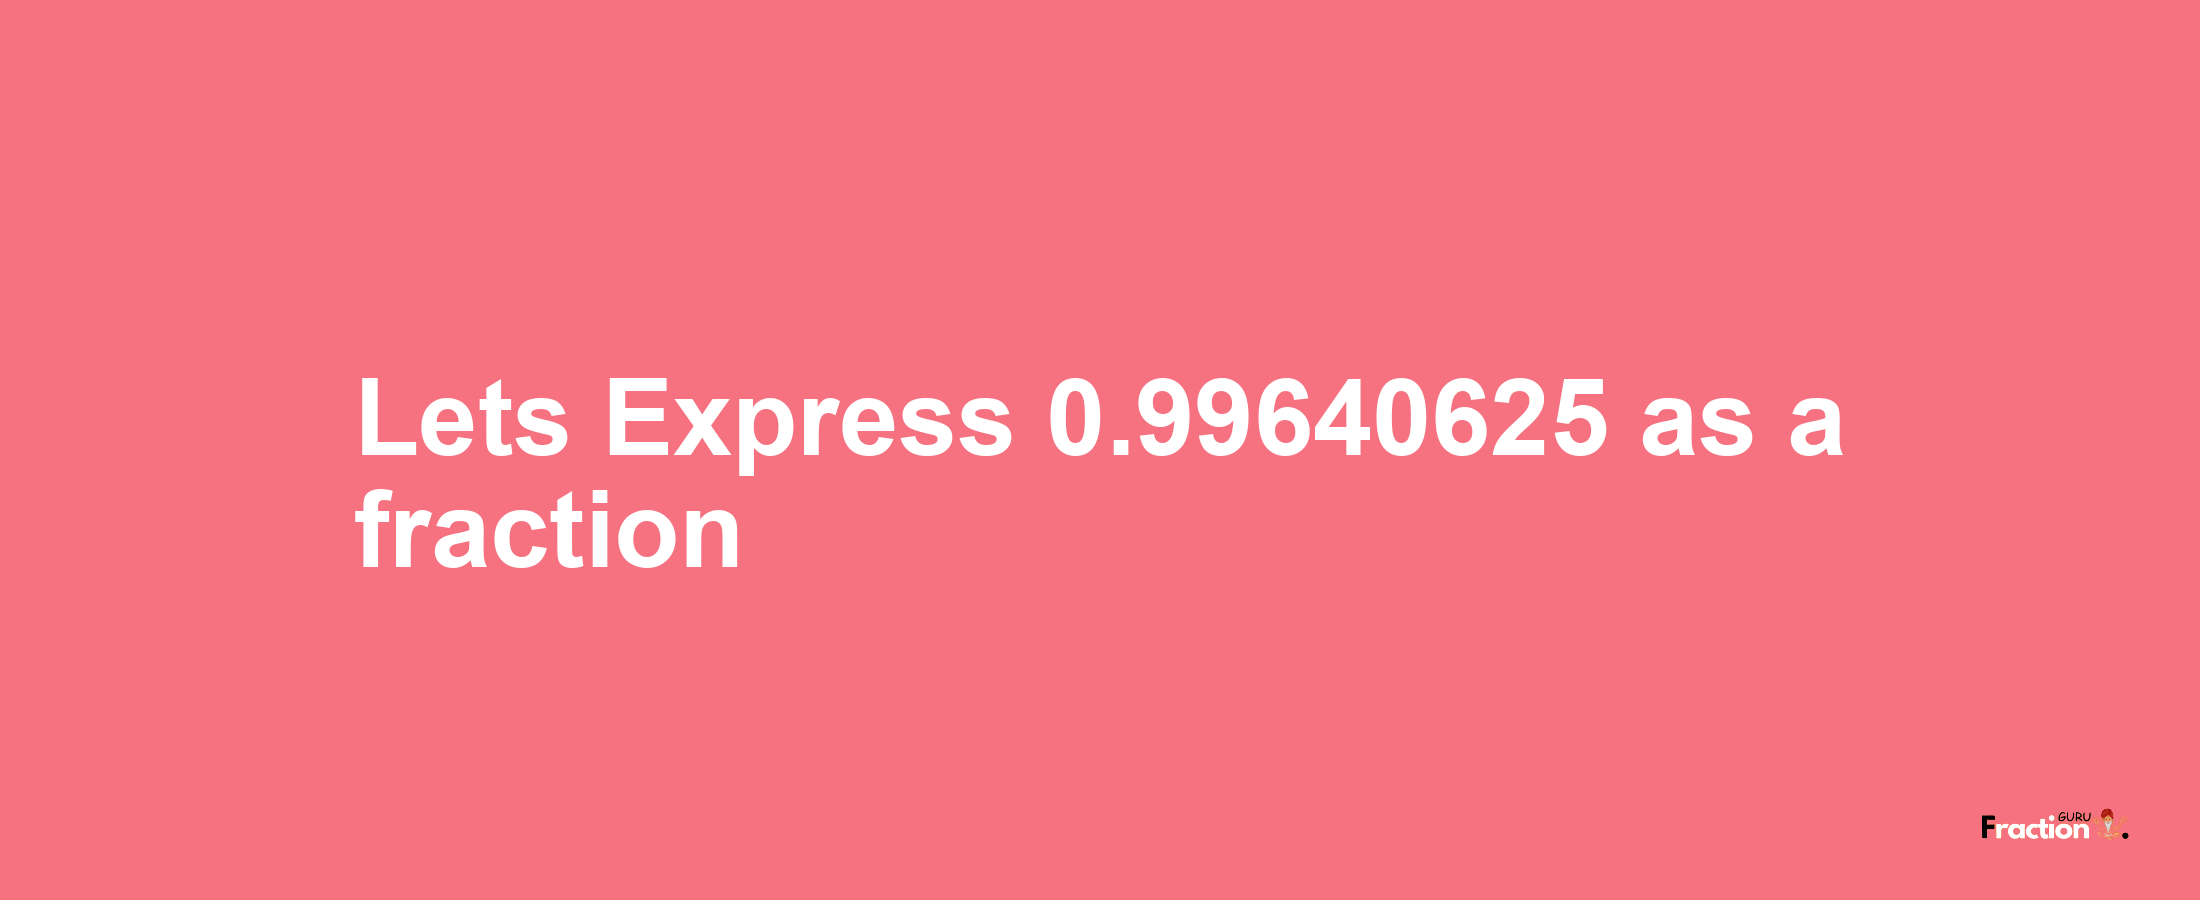 Lets Express 0.99640625 as afraction